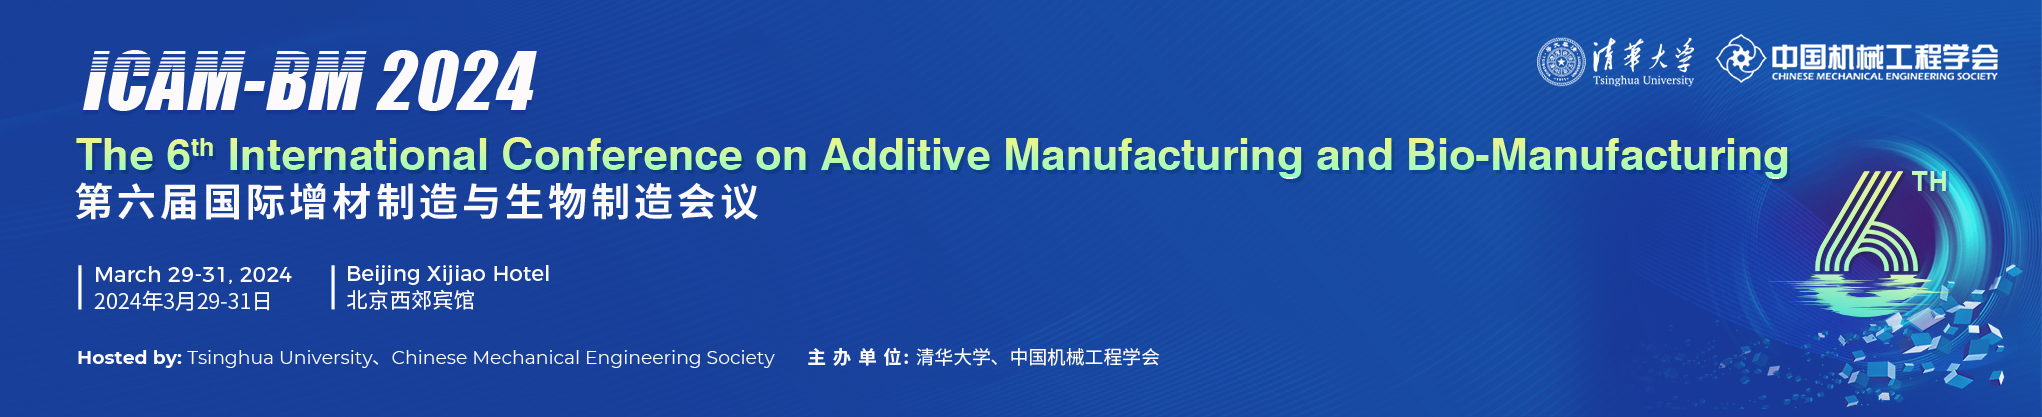 6th International Conference on Additive Manufacturing and Bio-Manufacturing